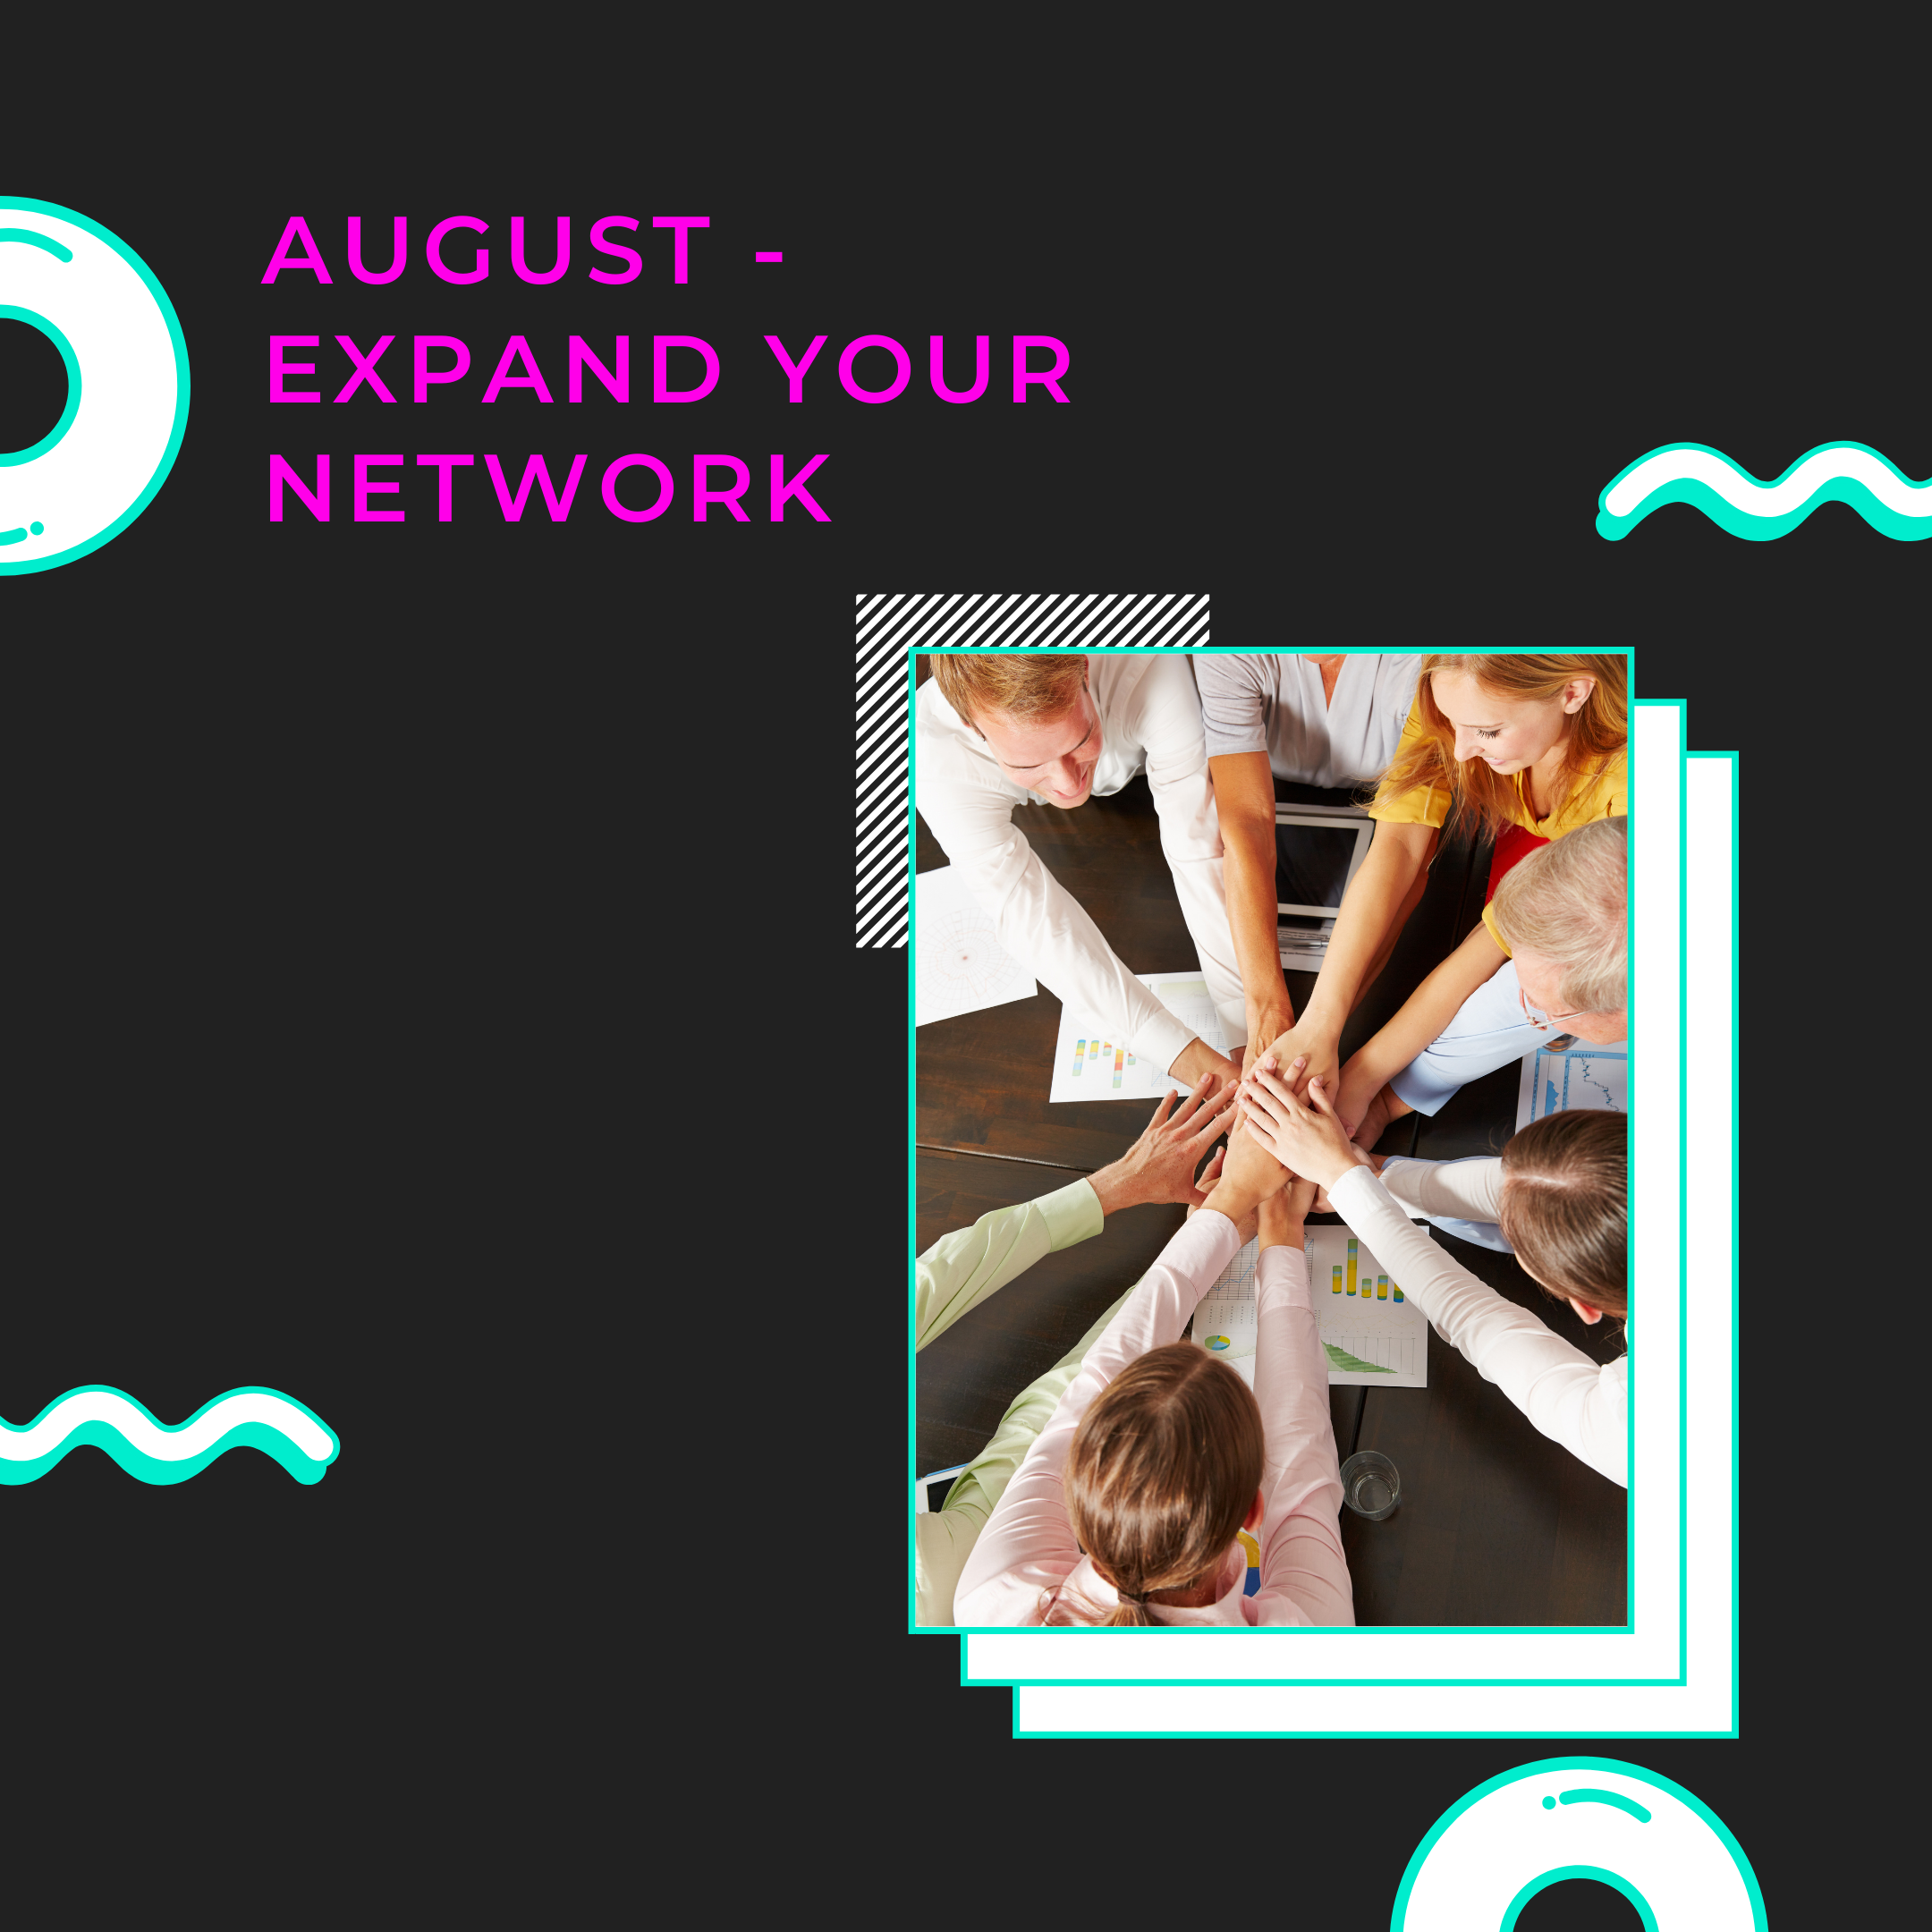 Expand your network in August